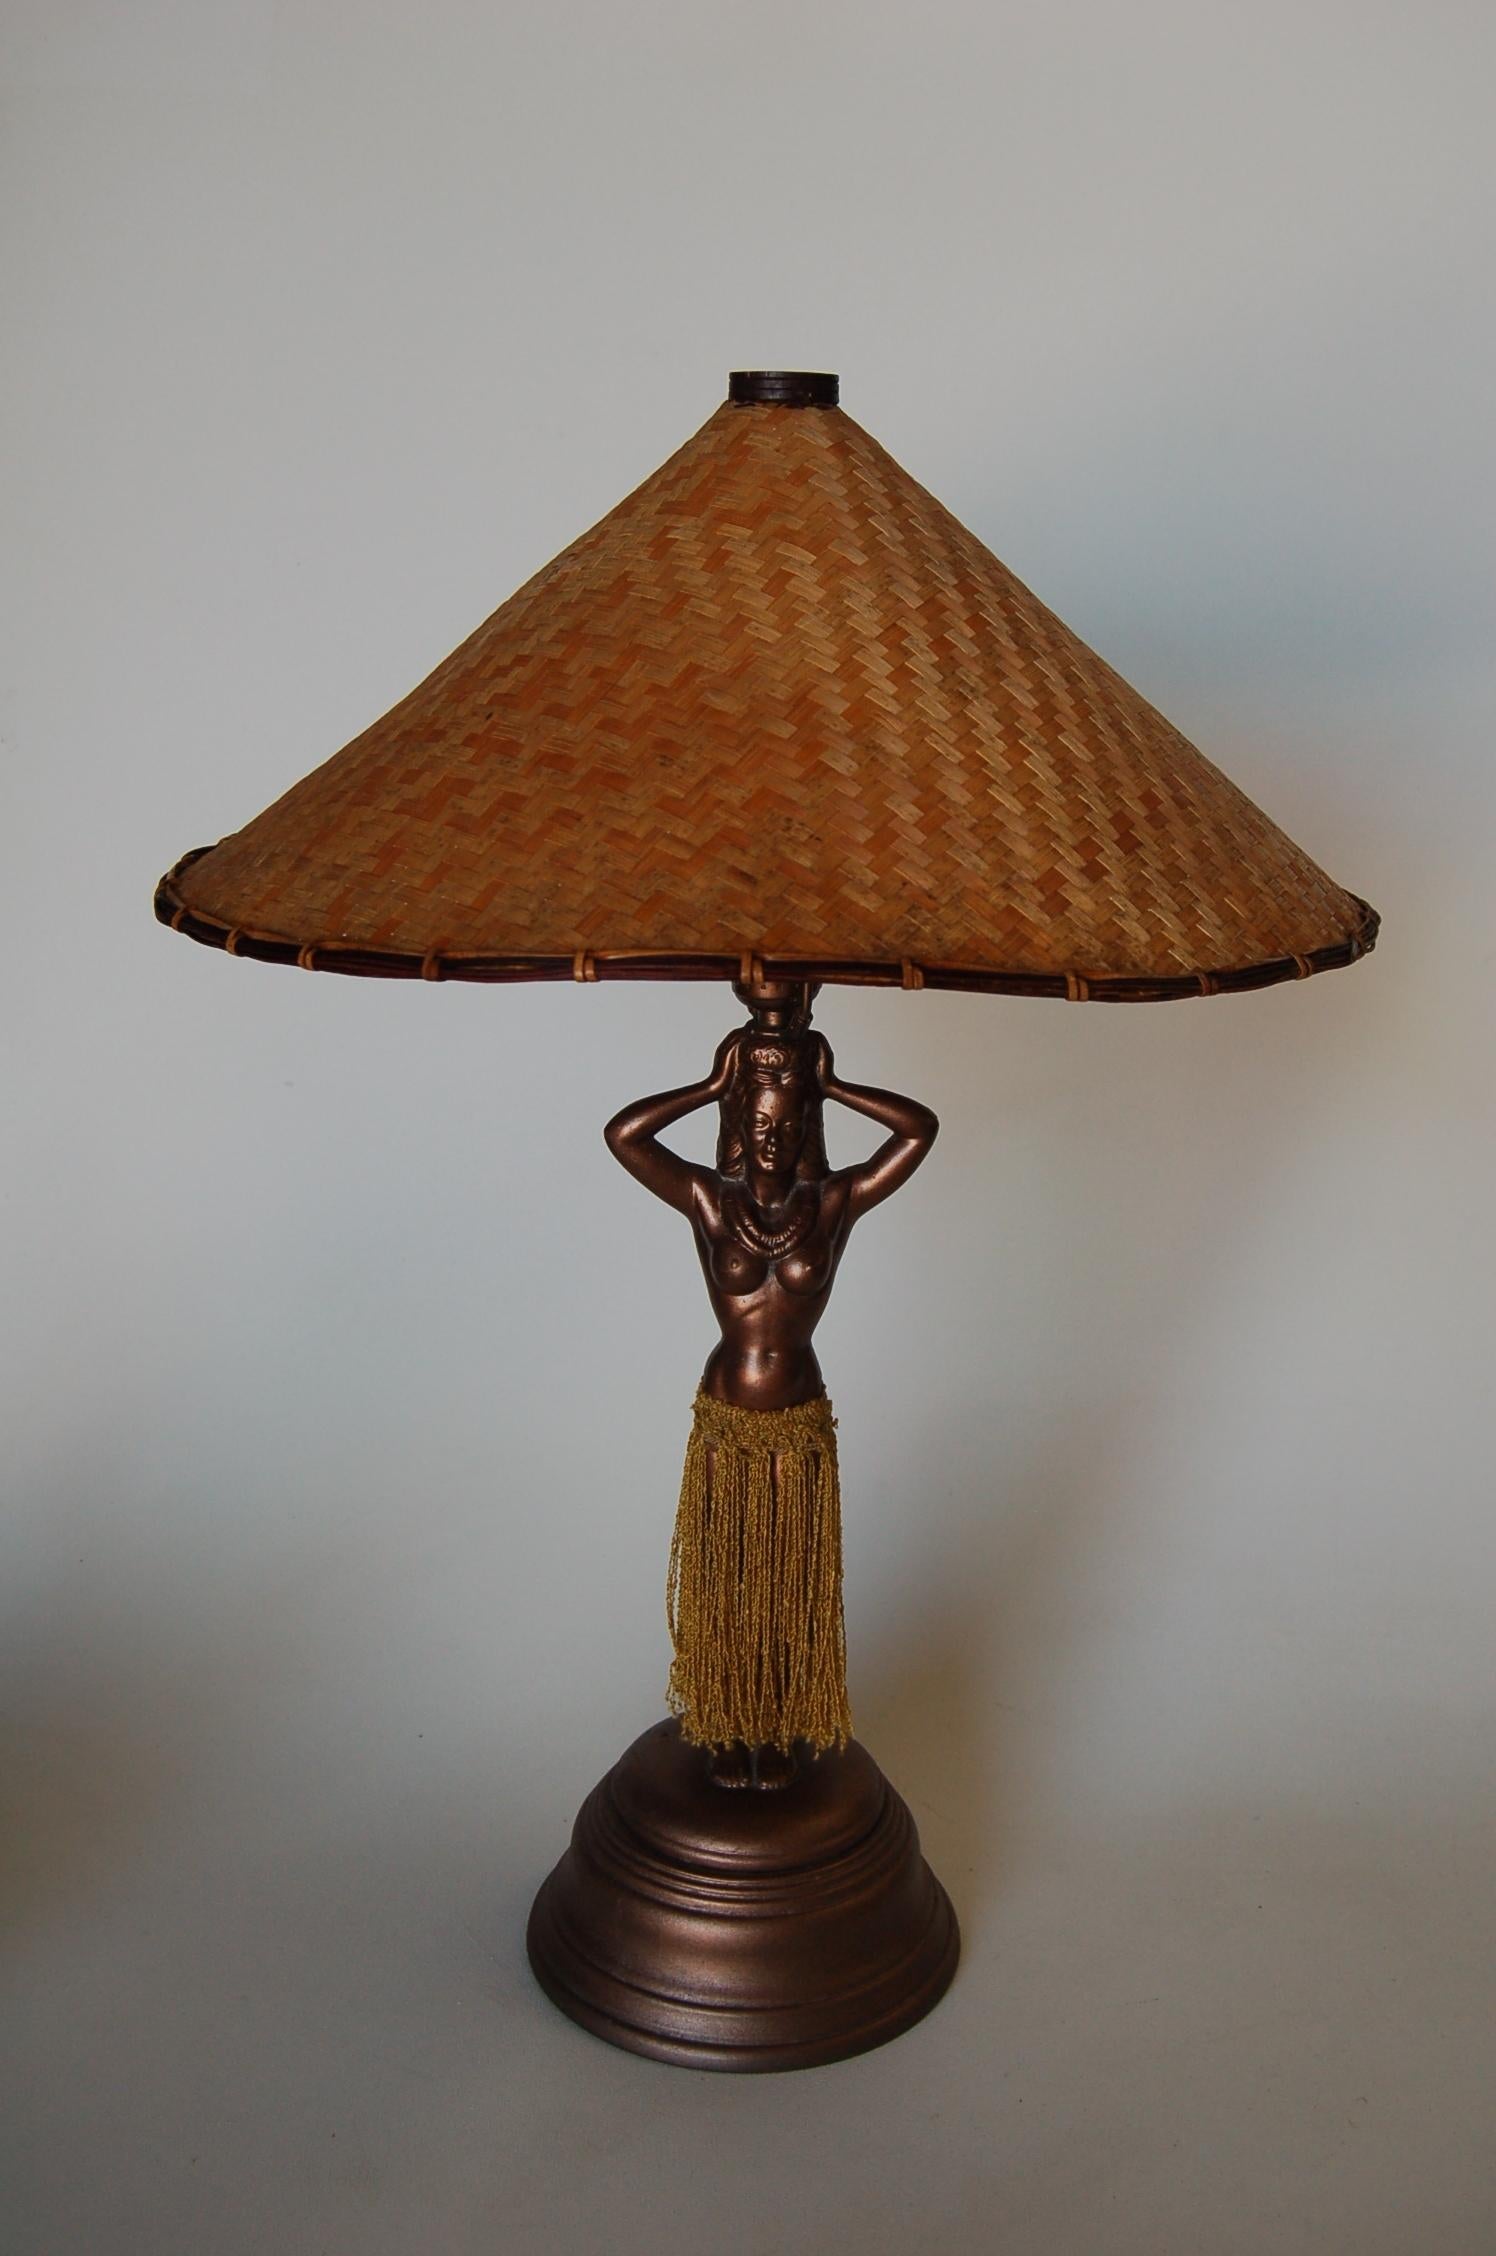 Authentic 1940s Hawaiian Hulu girl with tassel fringe skirt on the bronze-colored table lamp and complimenting straw lamp shade. Just a table lamp. 

Measures 7.5